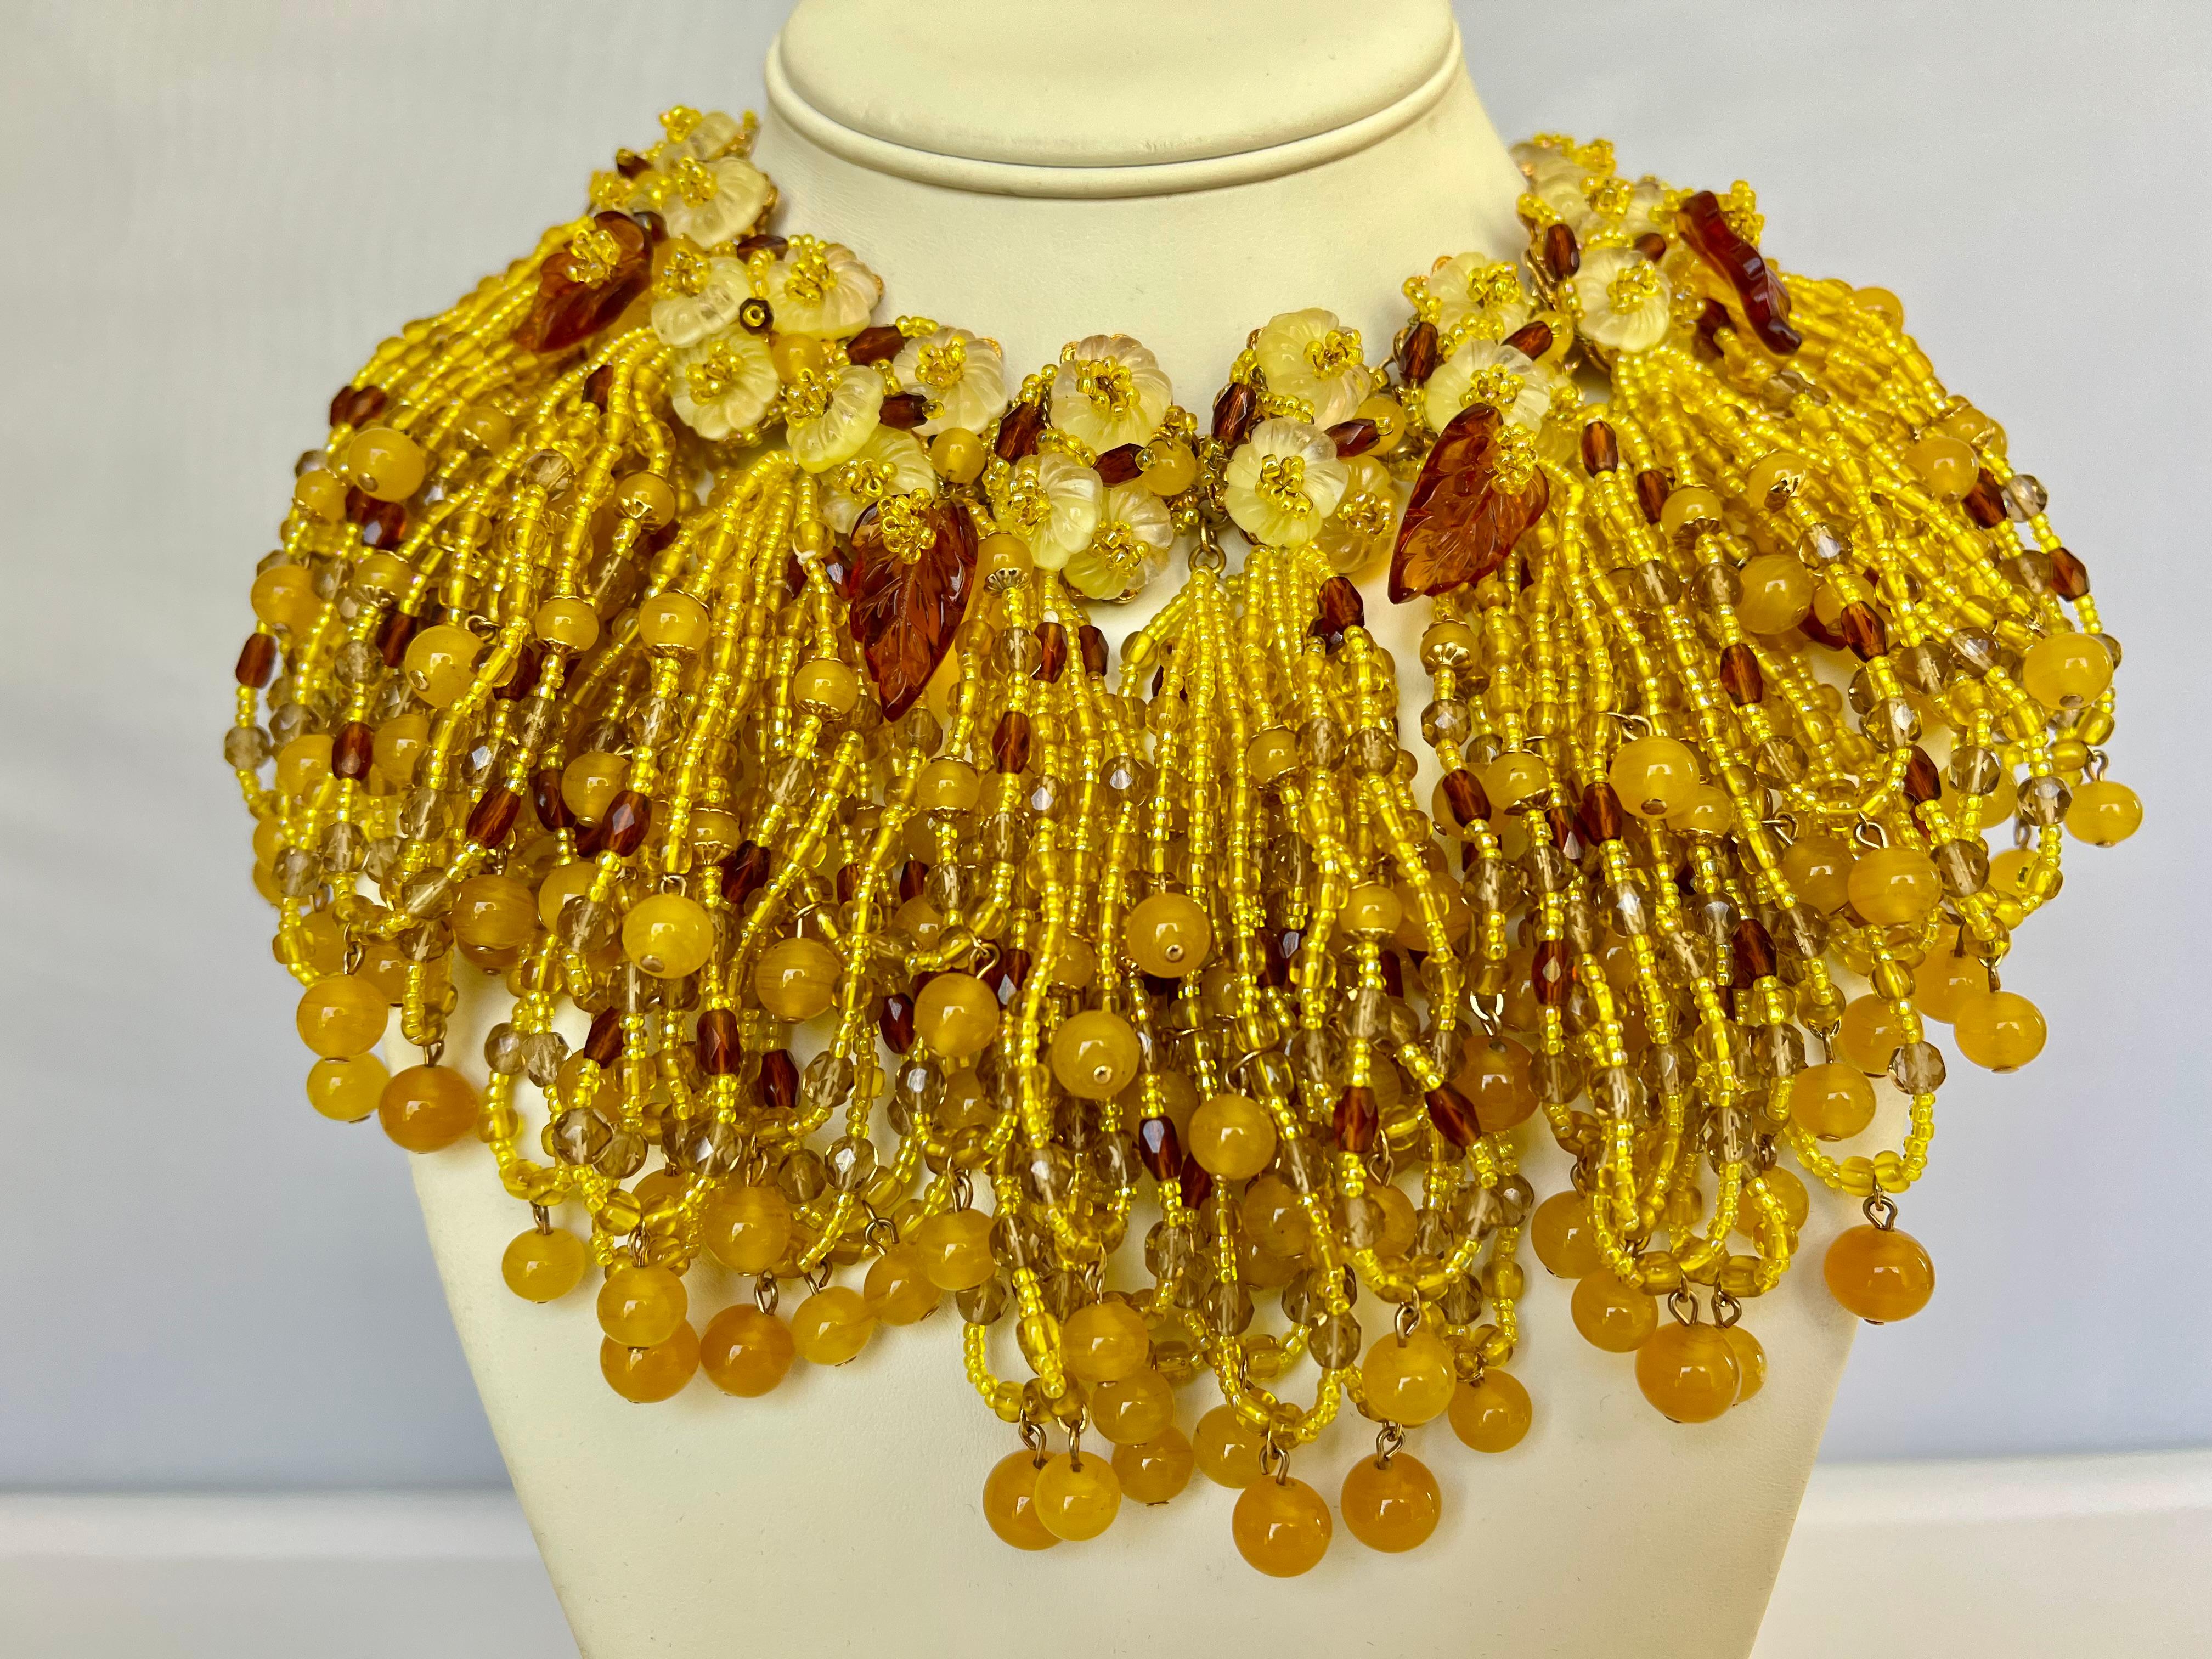 Fine and rare William de Lillo couture fringe necklace - comprised of French and German yellow glass beads and molten topaz 